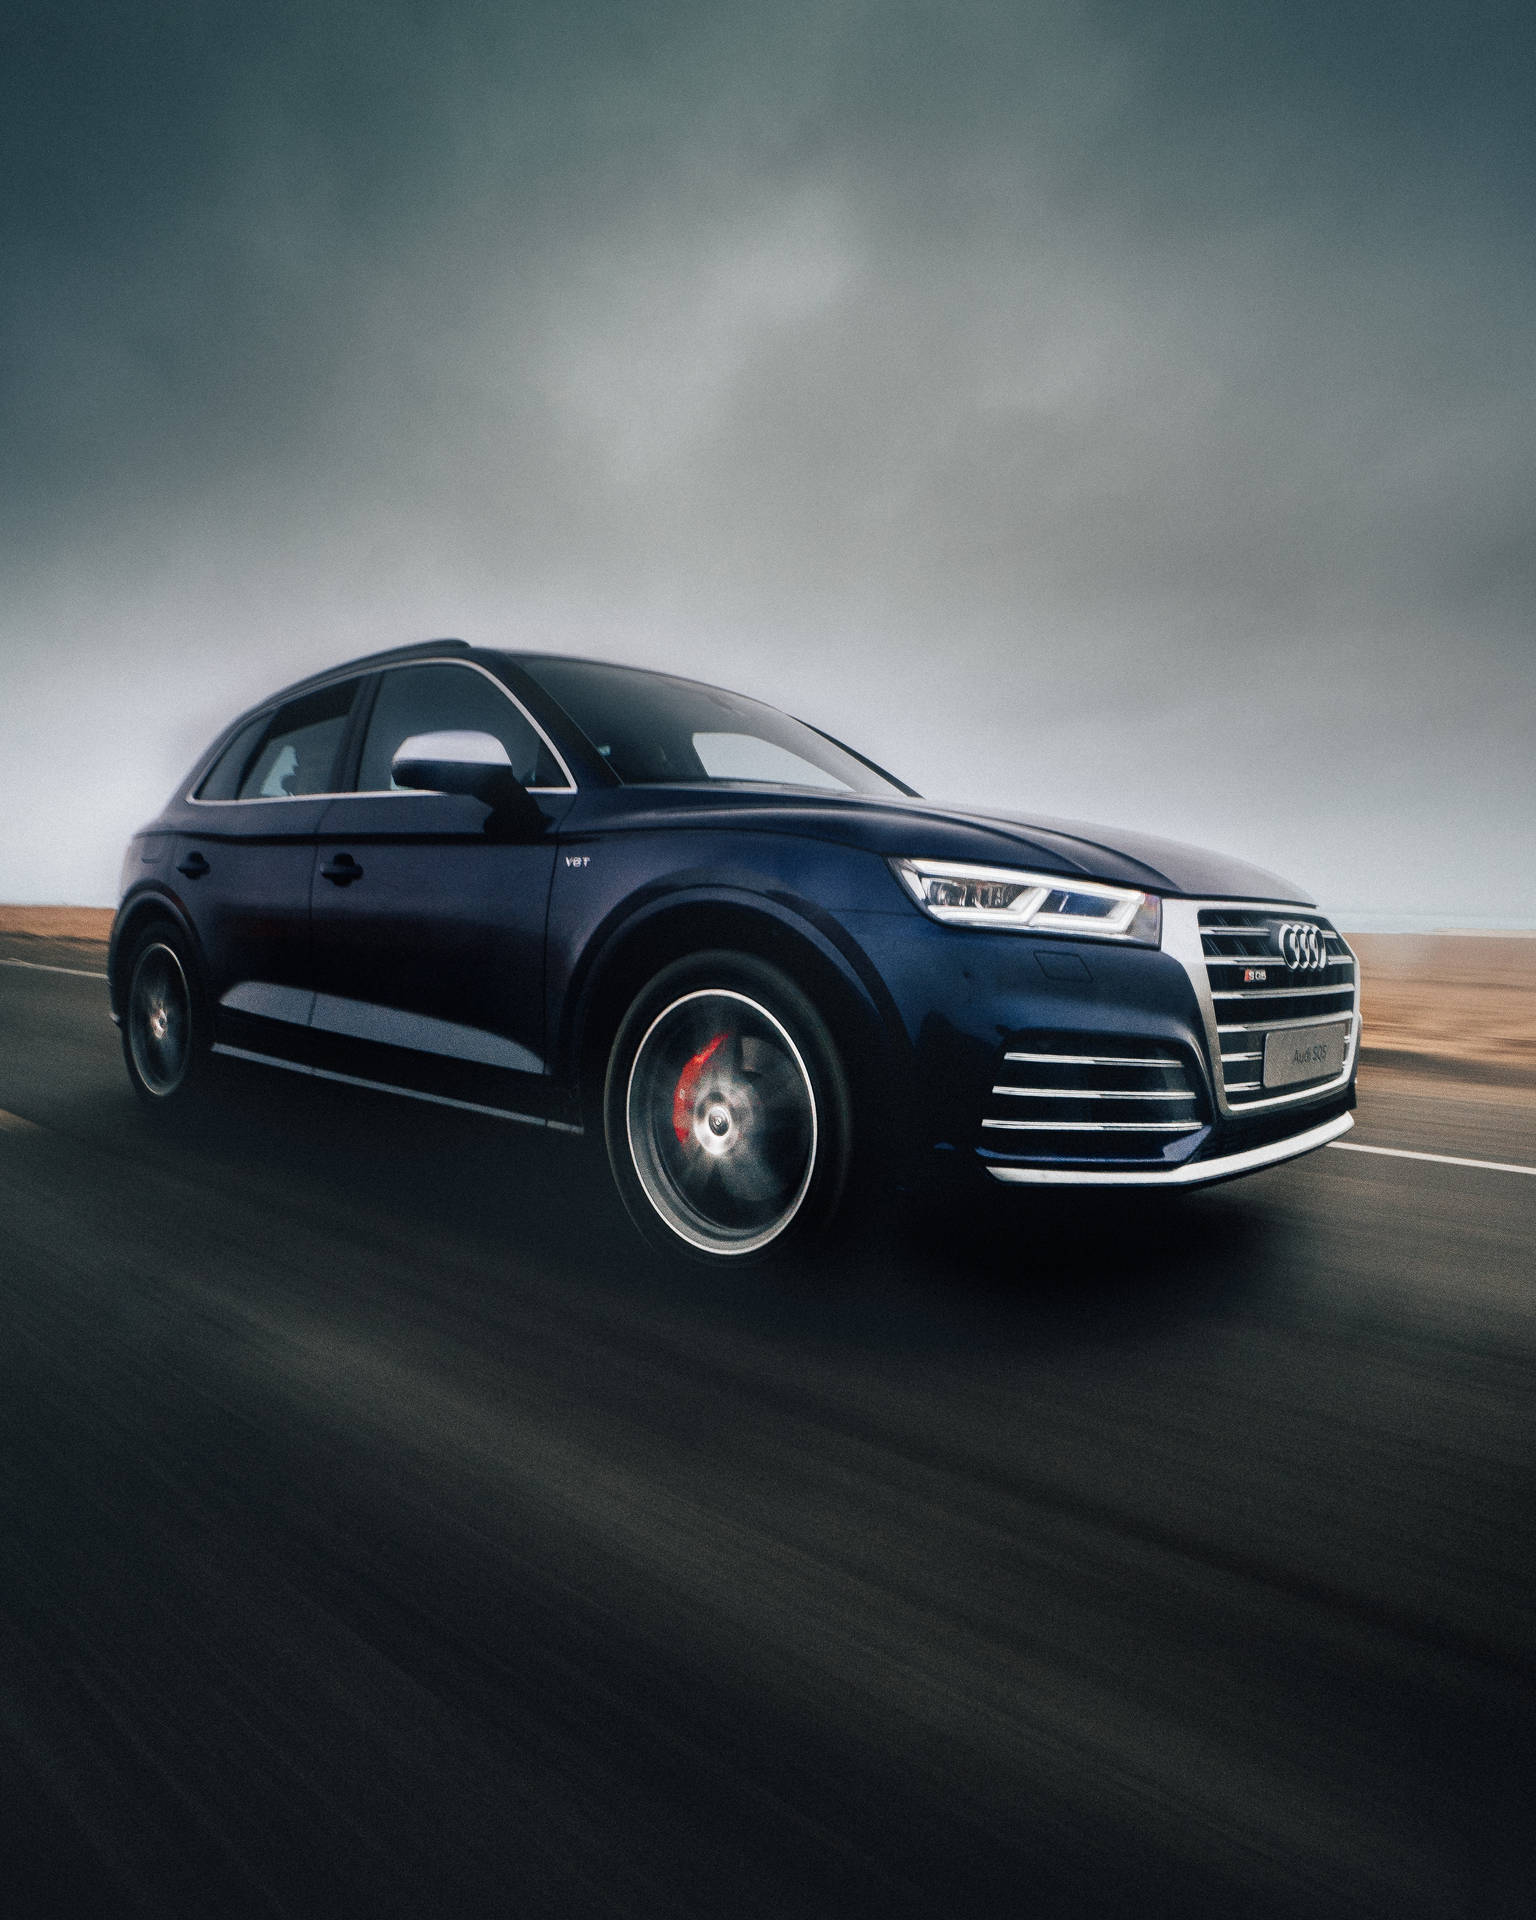 Audi 2854X3568 Wallpaper and Background Image